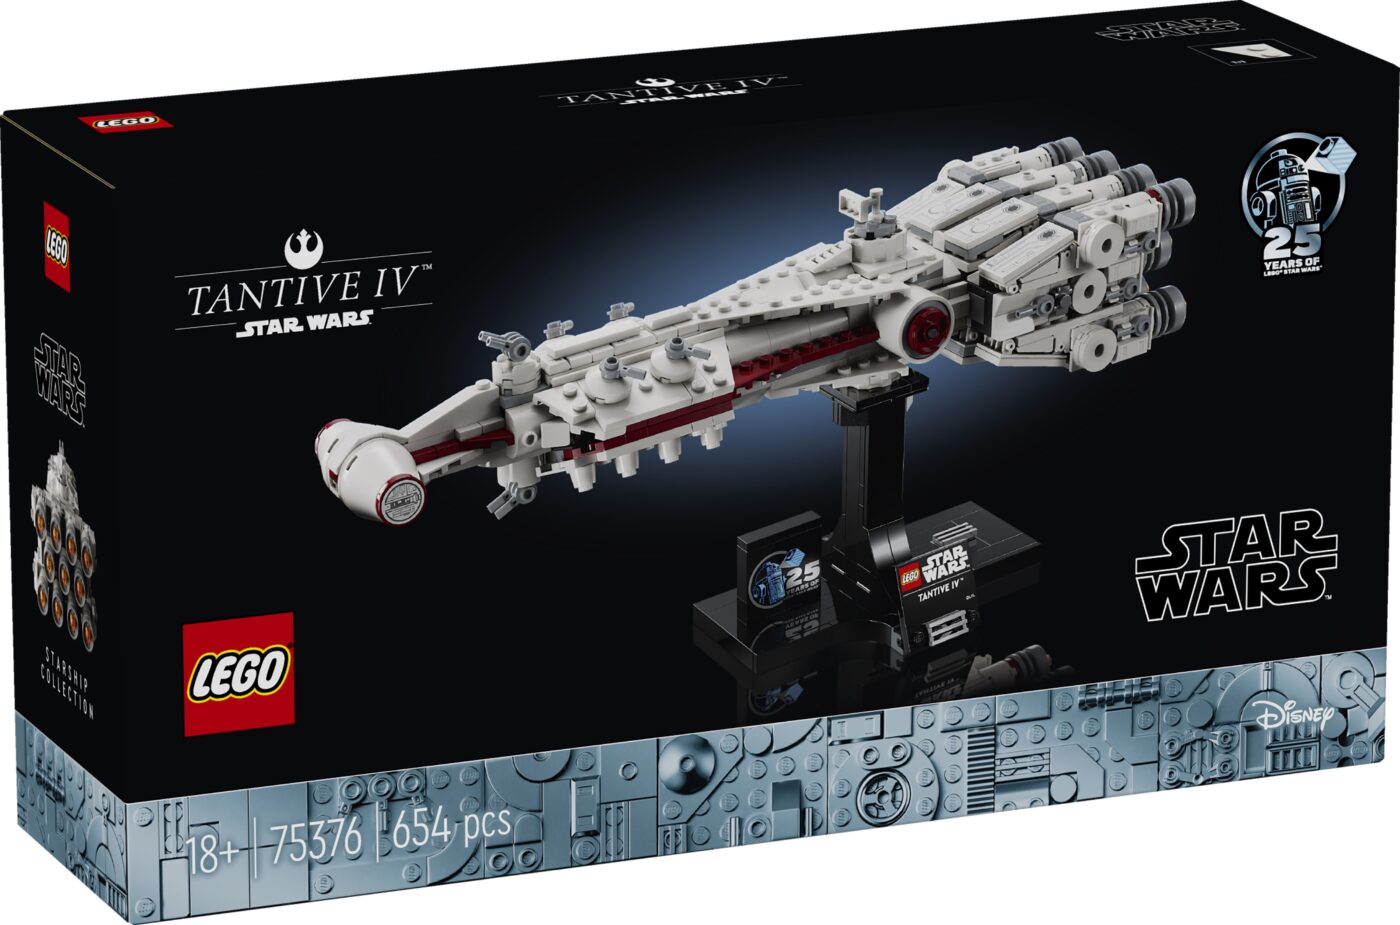 Entire lineup of LEGO Star Wars 25th anniversary set includes midi-scale Millennium Falcon, Tantive IV and the Invisible Hand!14